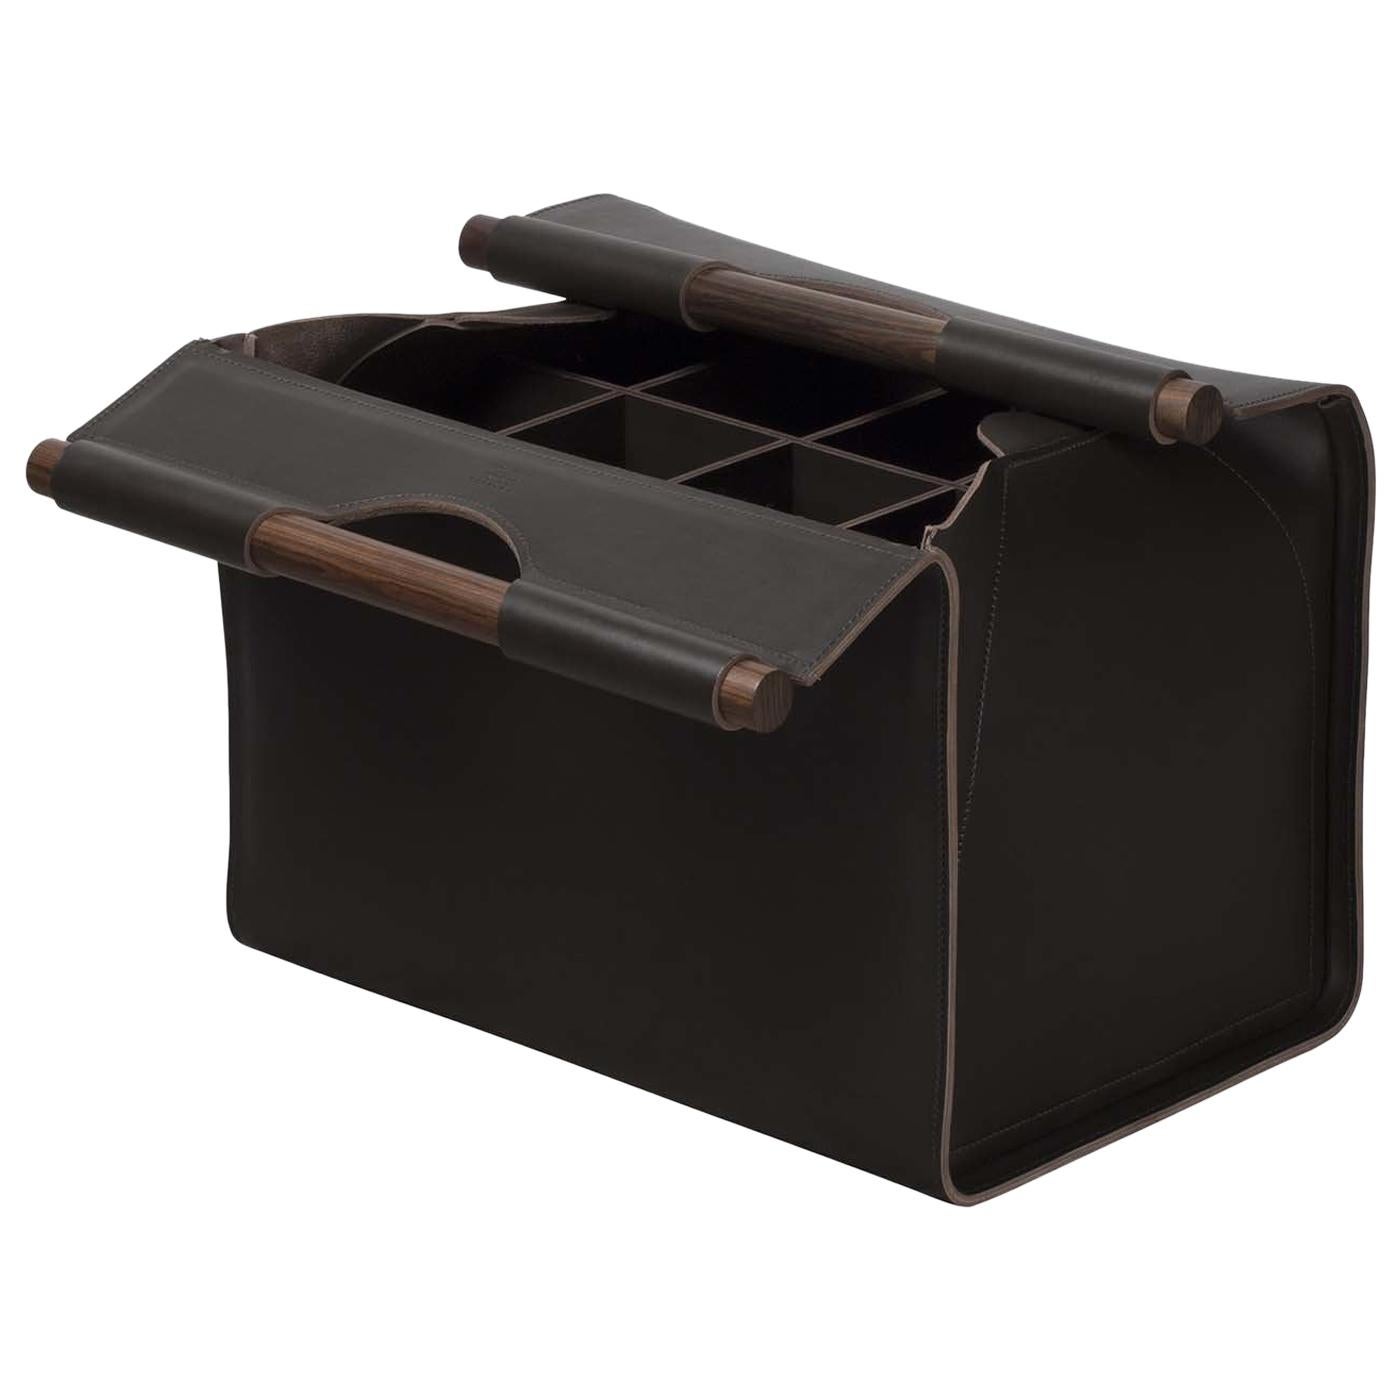 Jota Rectangular 8-Compartment Basket in Brown Leather